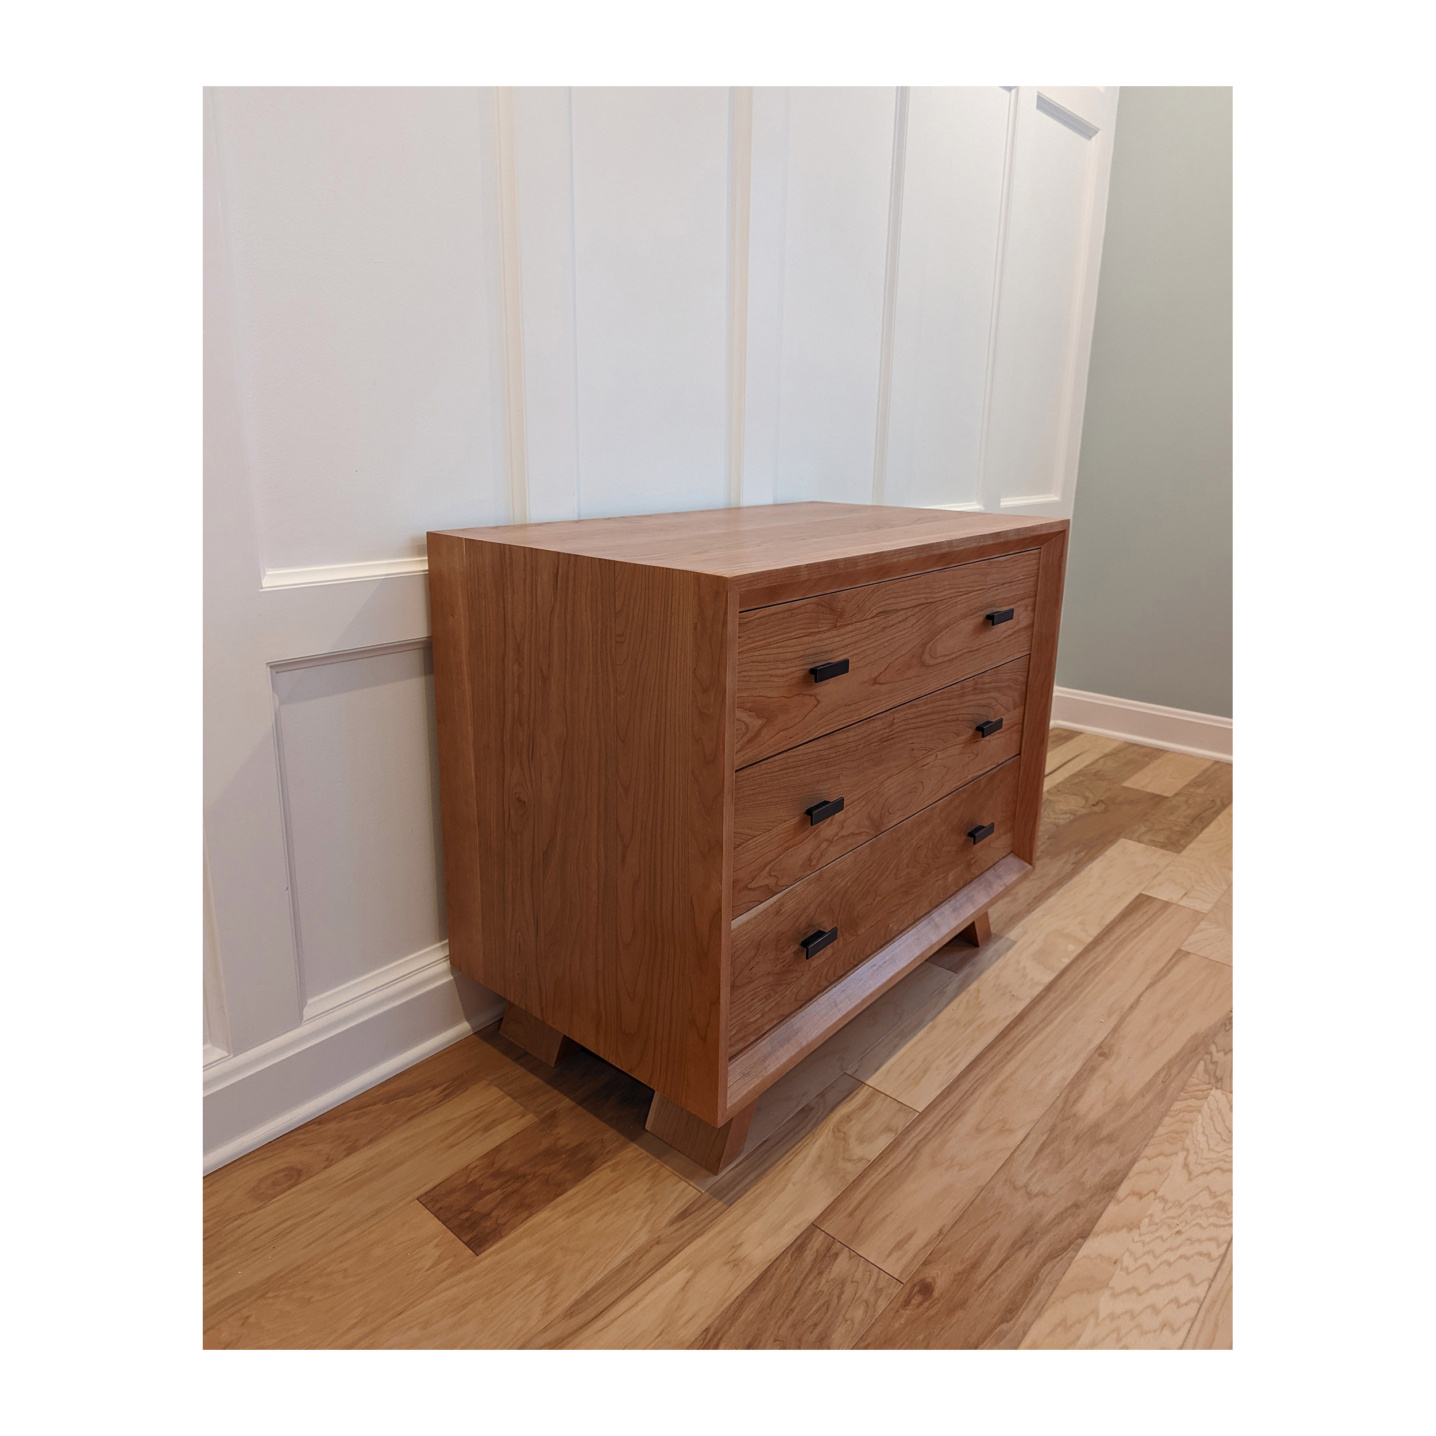 Custom Cherry Dresser in a Contemporary style